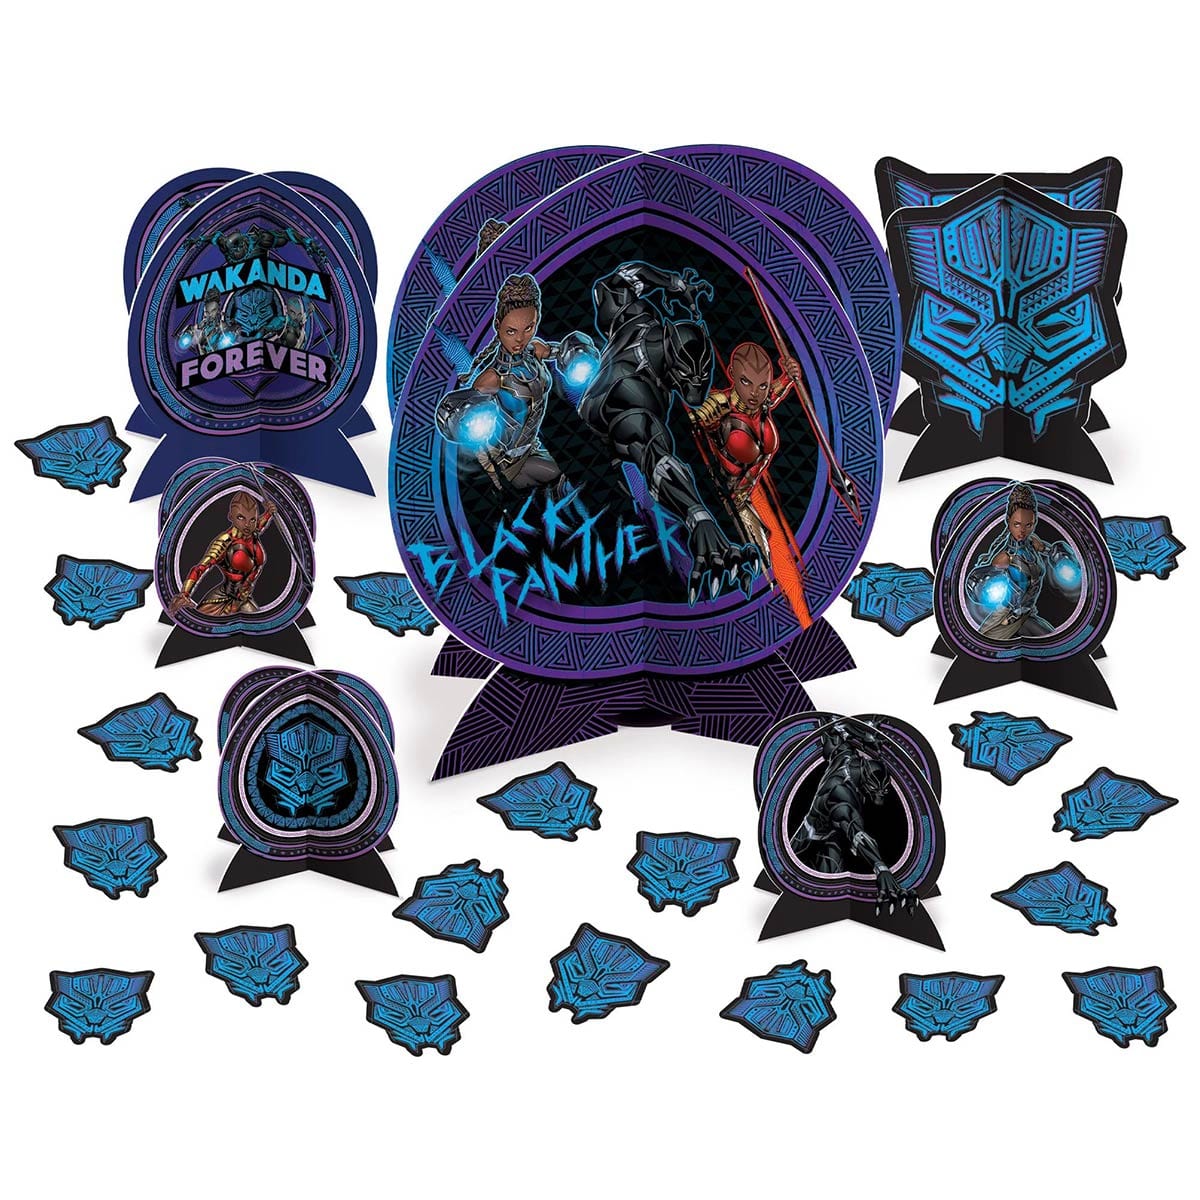 AMSCAN CA Kids Birthday Marvel Avengers Black Panther Wakanda Forever Birthday Paper Centerpiece Table Decoration Kit, 31 Count